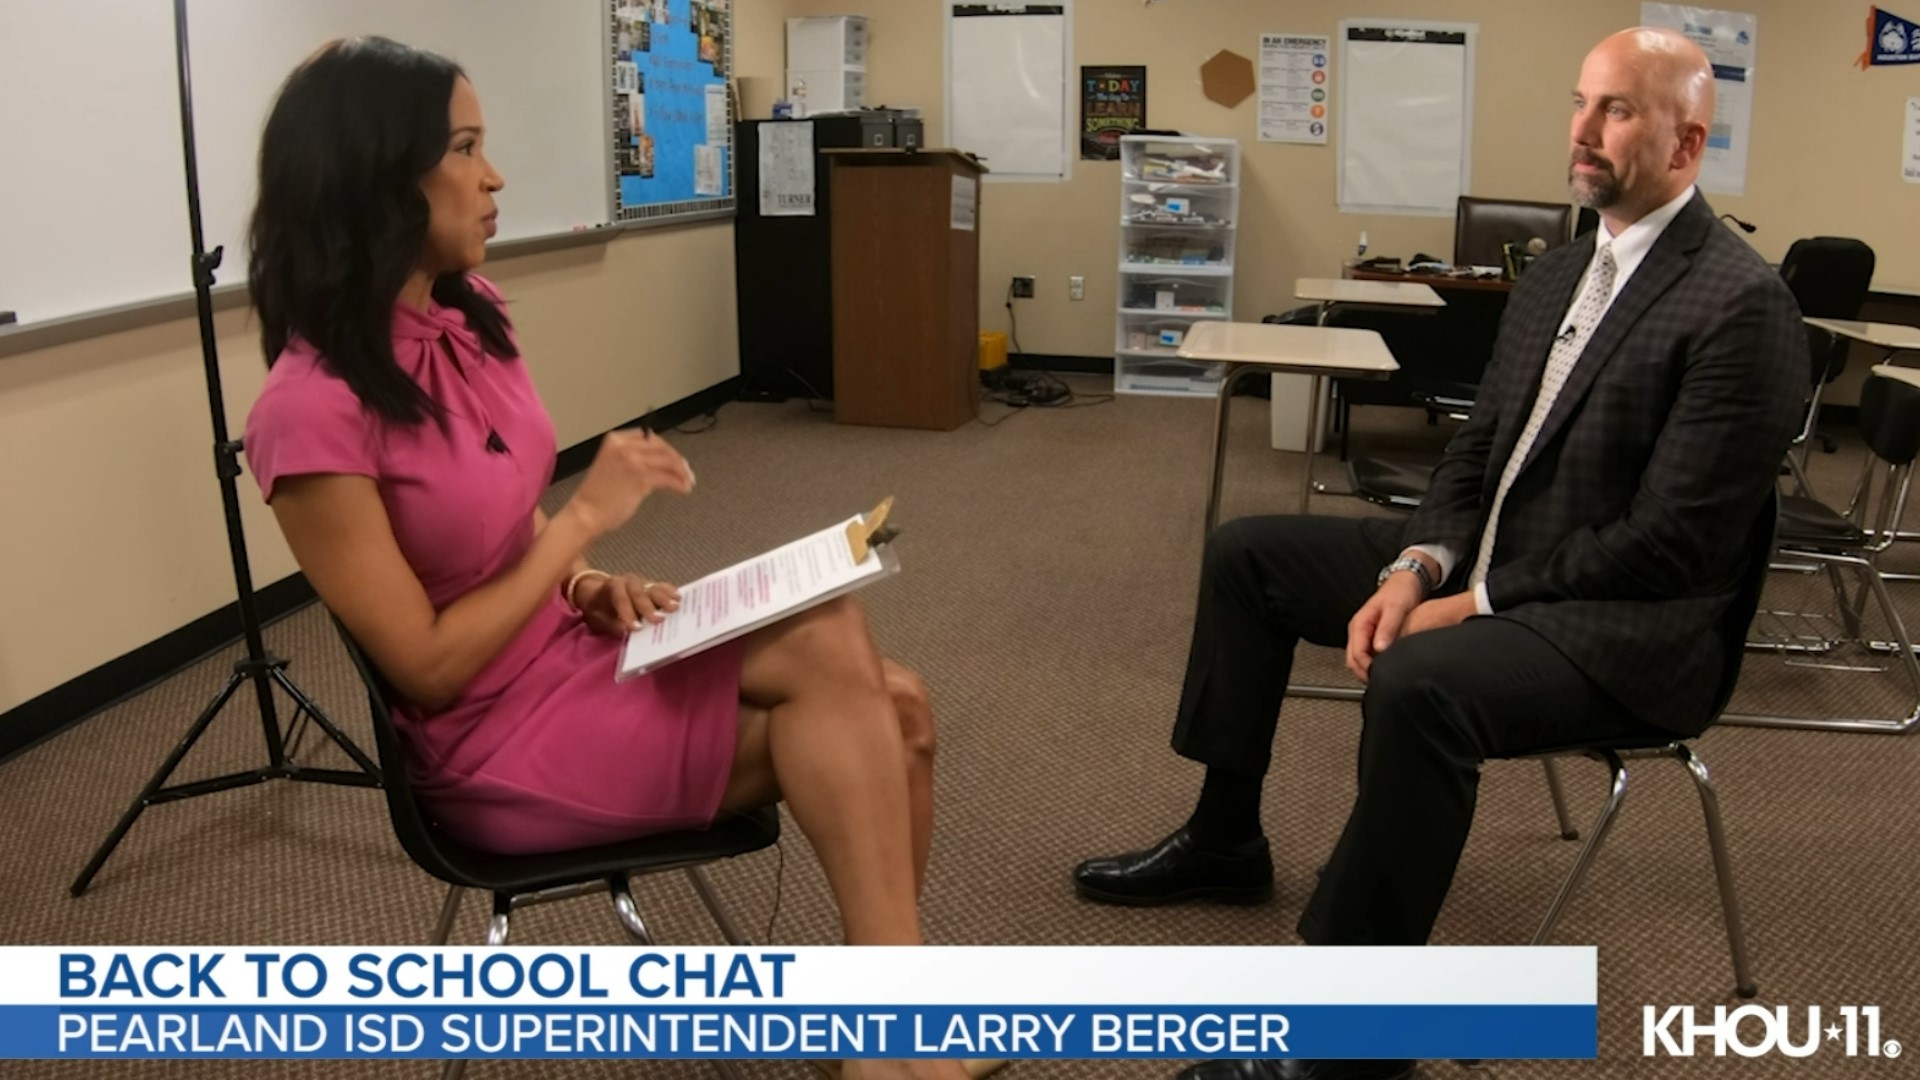 KHOU 11's Mia Gradney sat down with Superintendent Larry Berger with Pearland ISD. He answered questions and concerns you told us about in our survey.